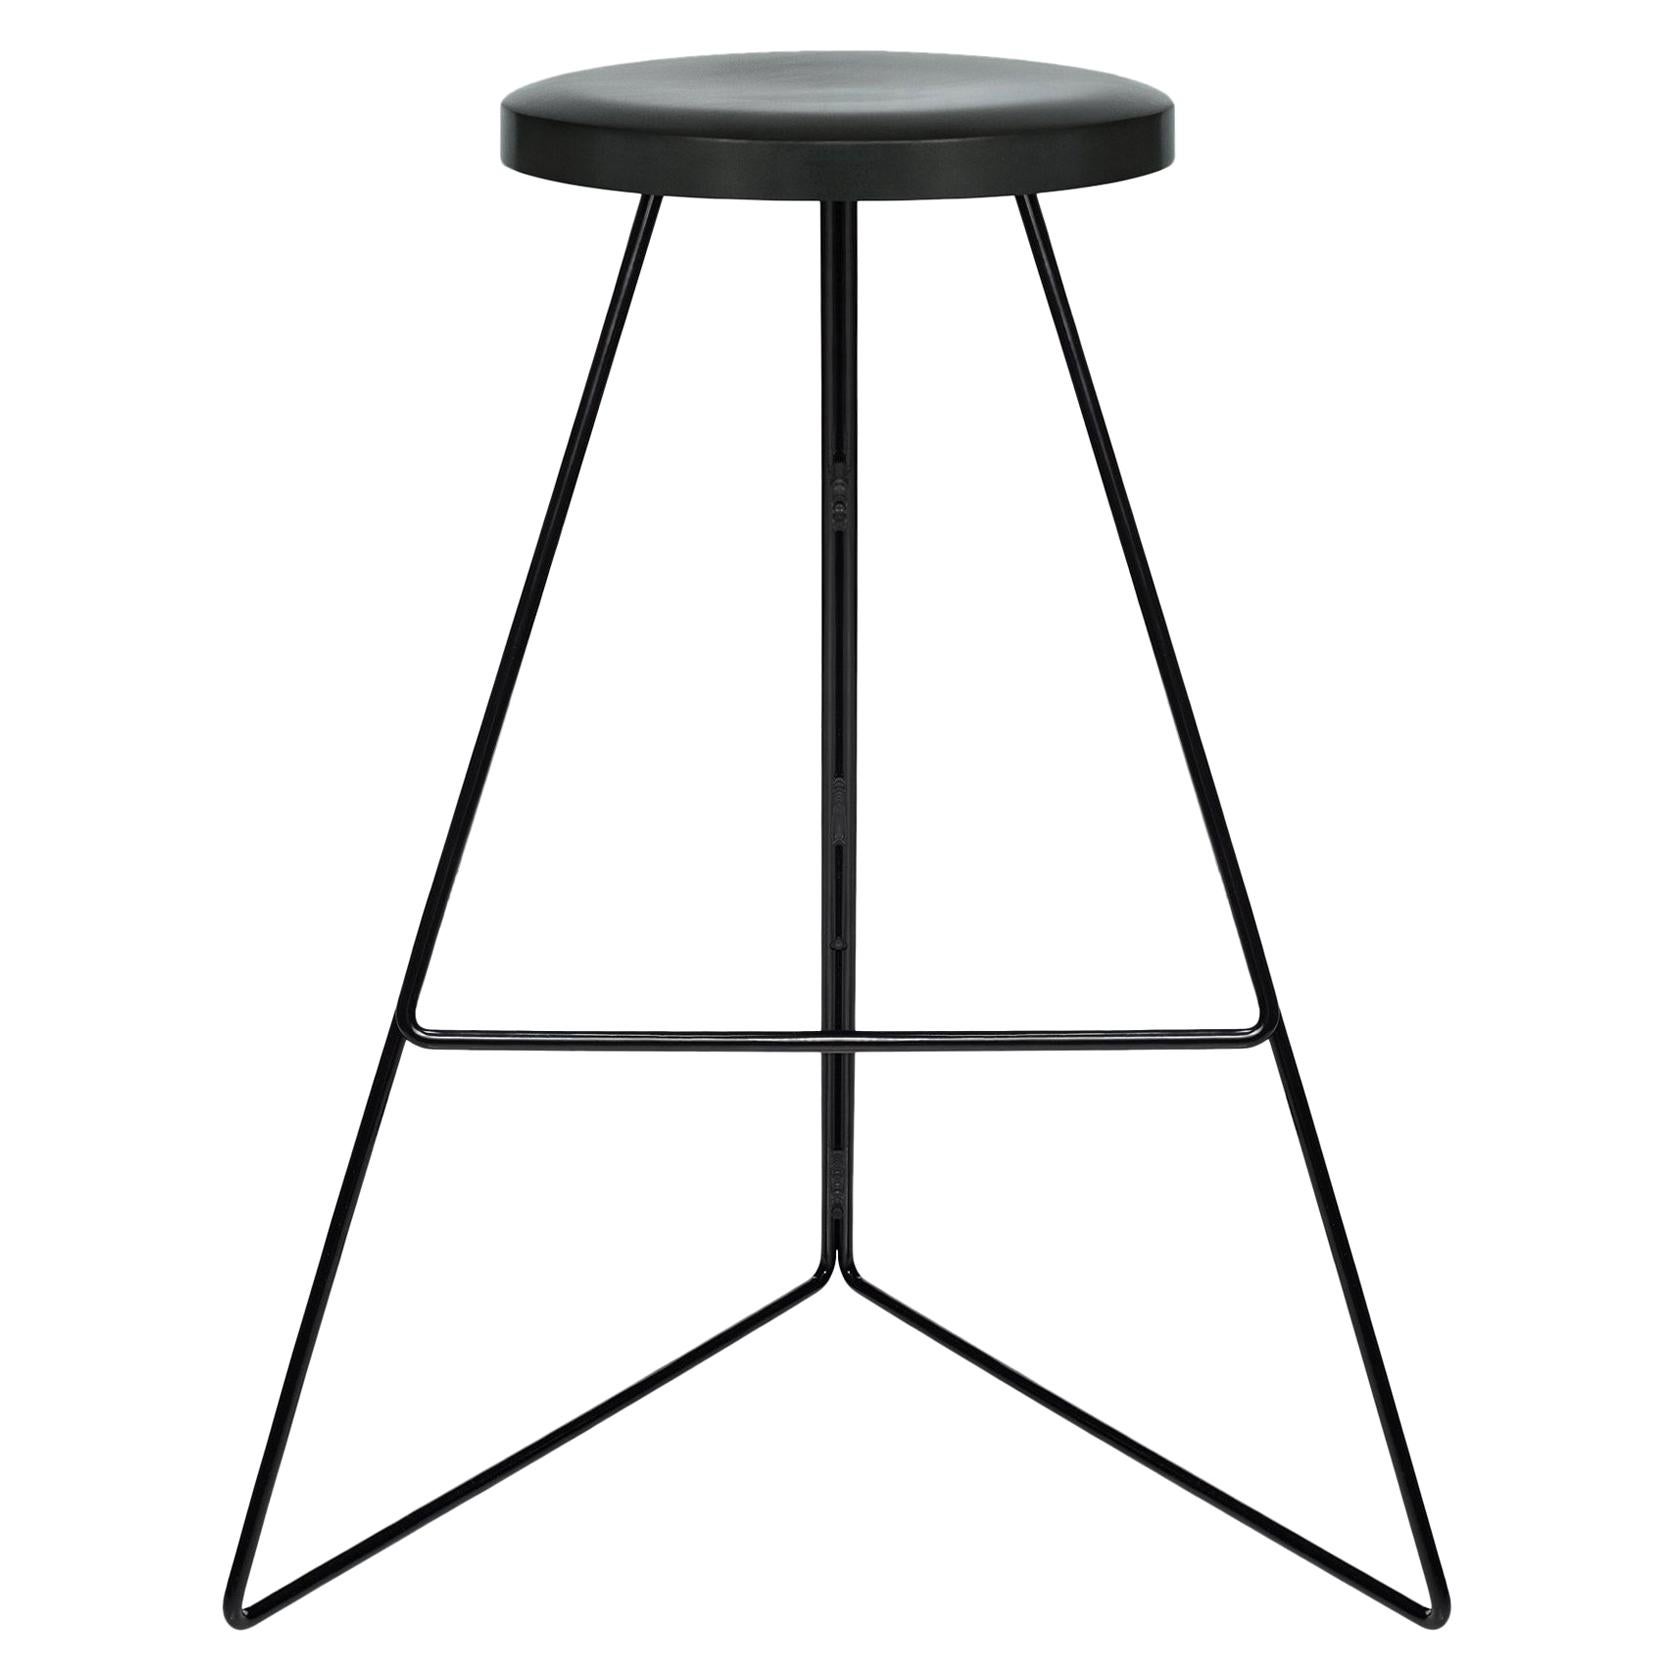 Coleman Stool, Black and Charcoal, 54 Variations For Sale